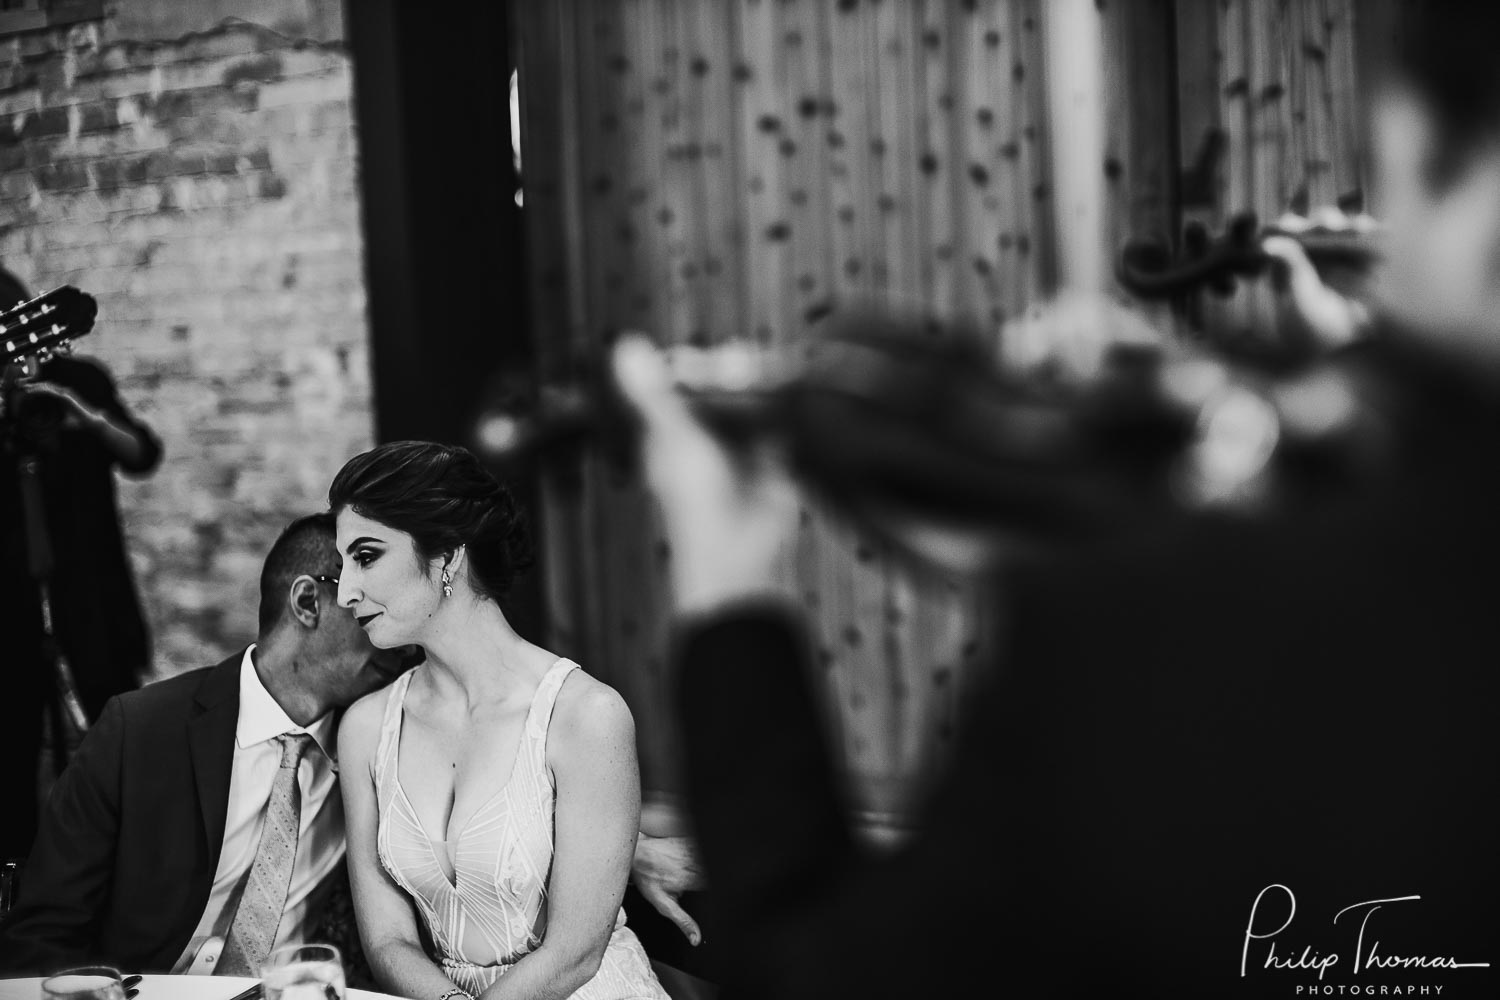 Claire and Carlos share a moment as mariachis play in foreground - 37 Philip Thomas Photography-Sunset Station Wedding San Antonio documentary weddings